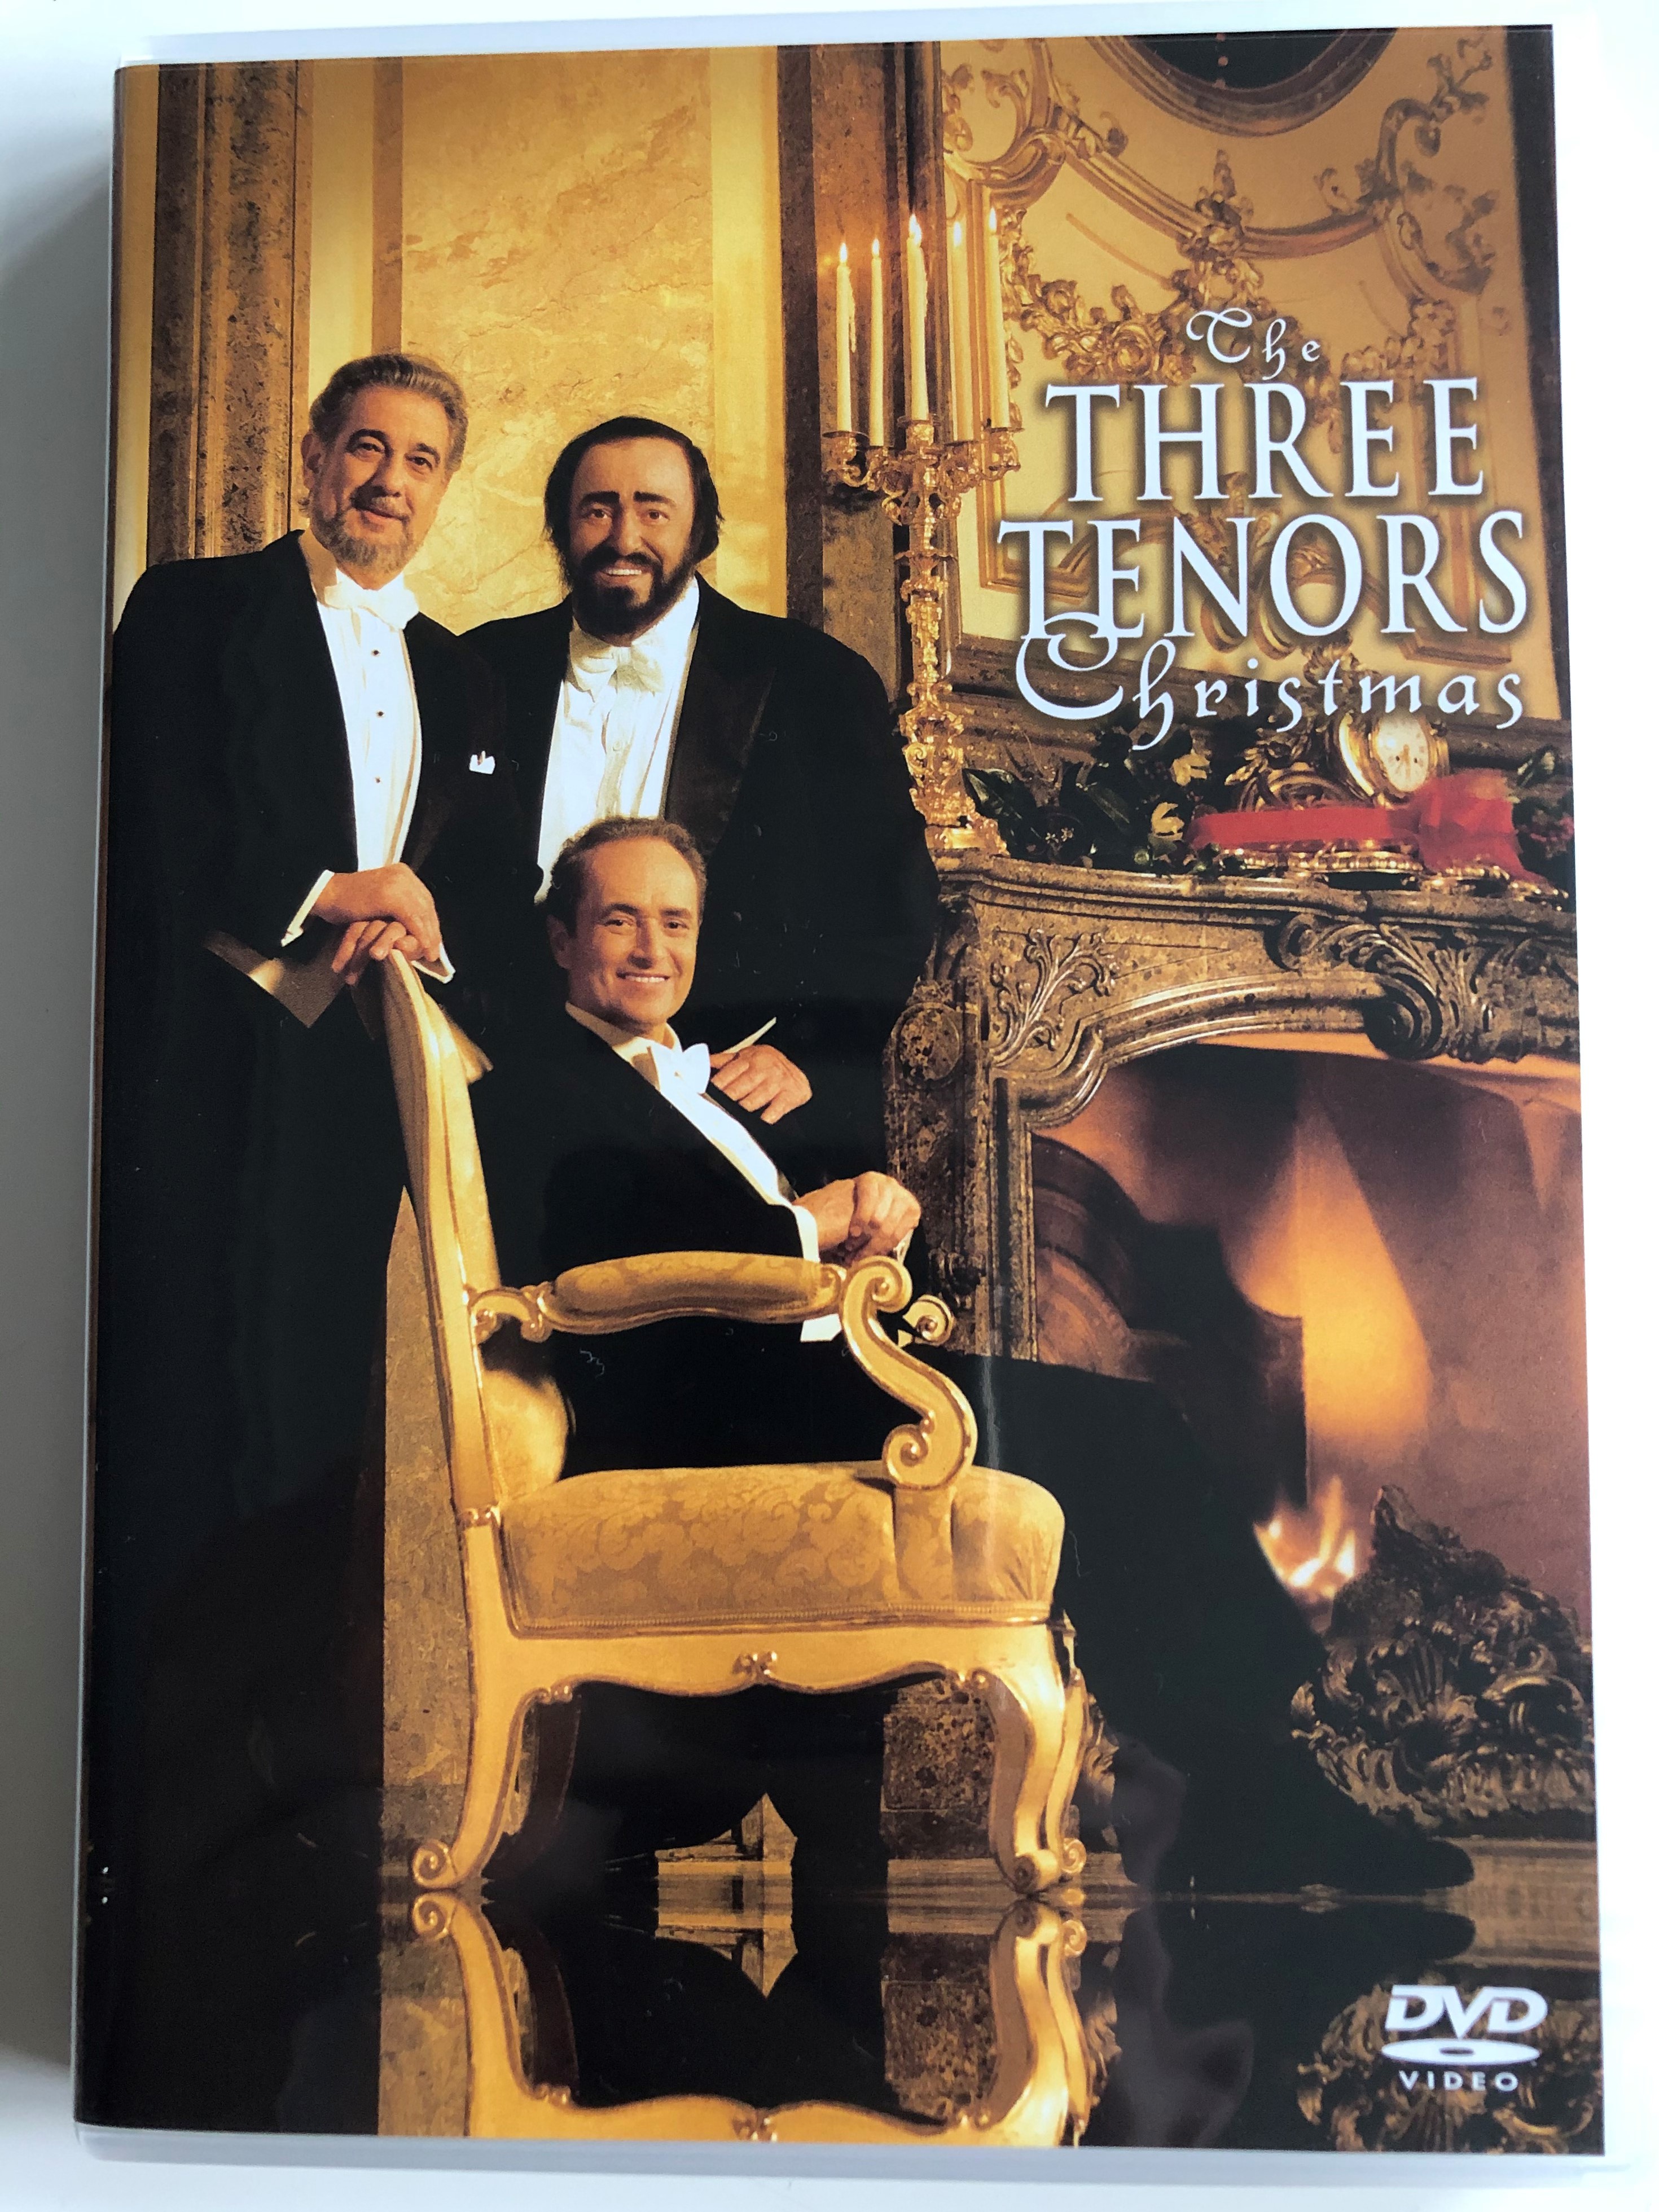 The Three Tenors - Christmas DVD 1999 / Directed by David Mallet / José  Carreras, Plácido Domingo, Luciano Pavarotti / Vienna Symphony / Conducted  by Steven Mercurio / Recorded LIVE at the Konzerthaus, Vienna, Austria /  Sony Entertainment ...